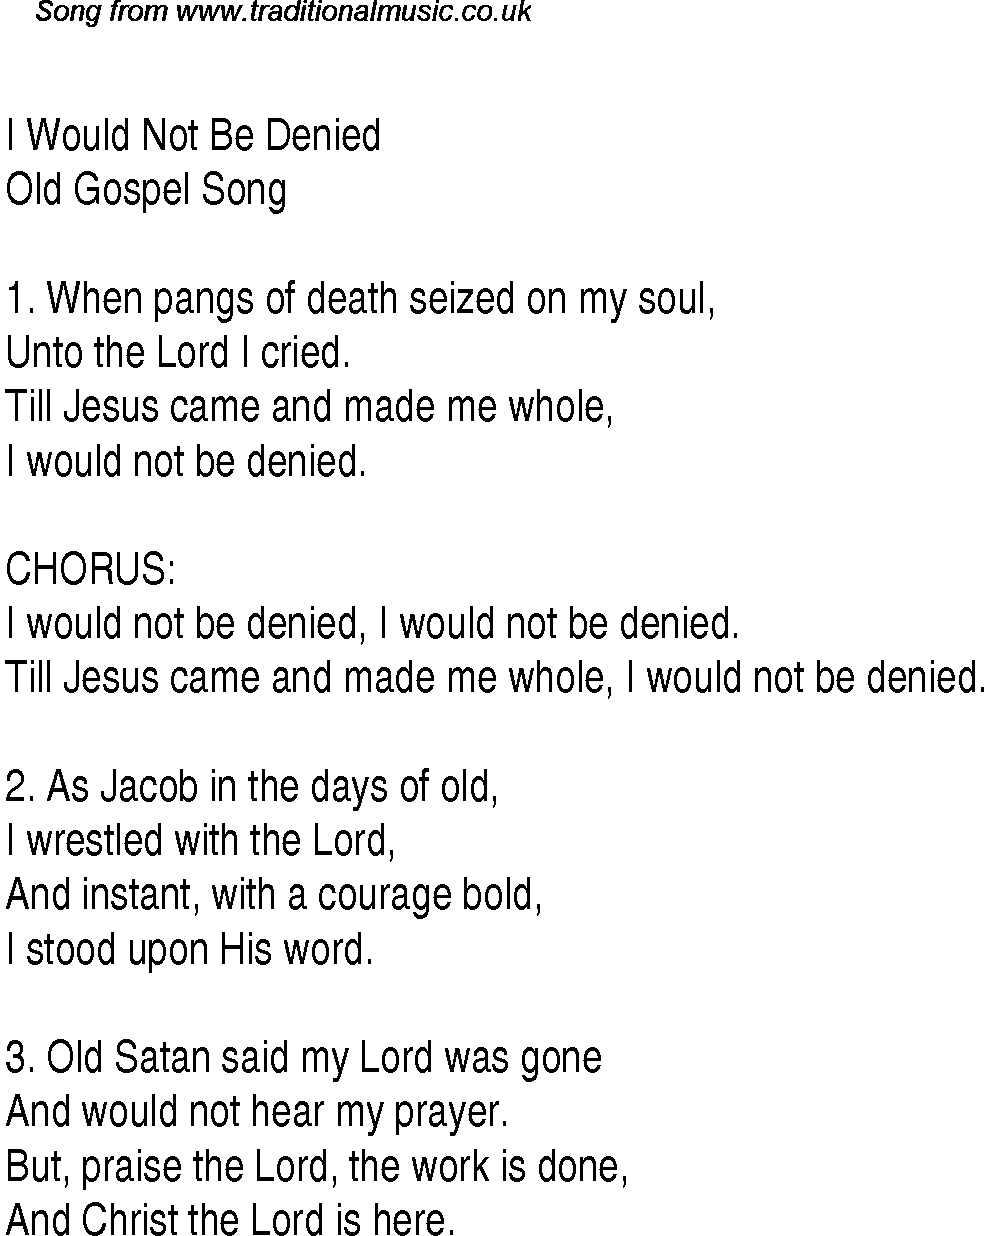 Gospel Song: i-would-not-be-denied, lyrics and chords.